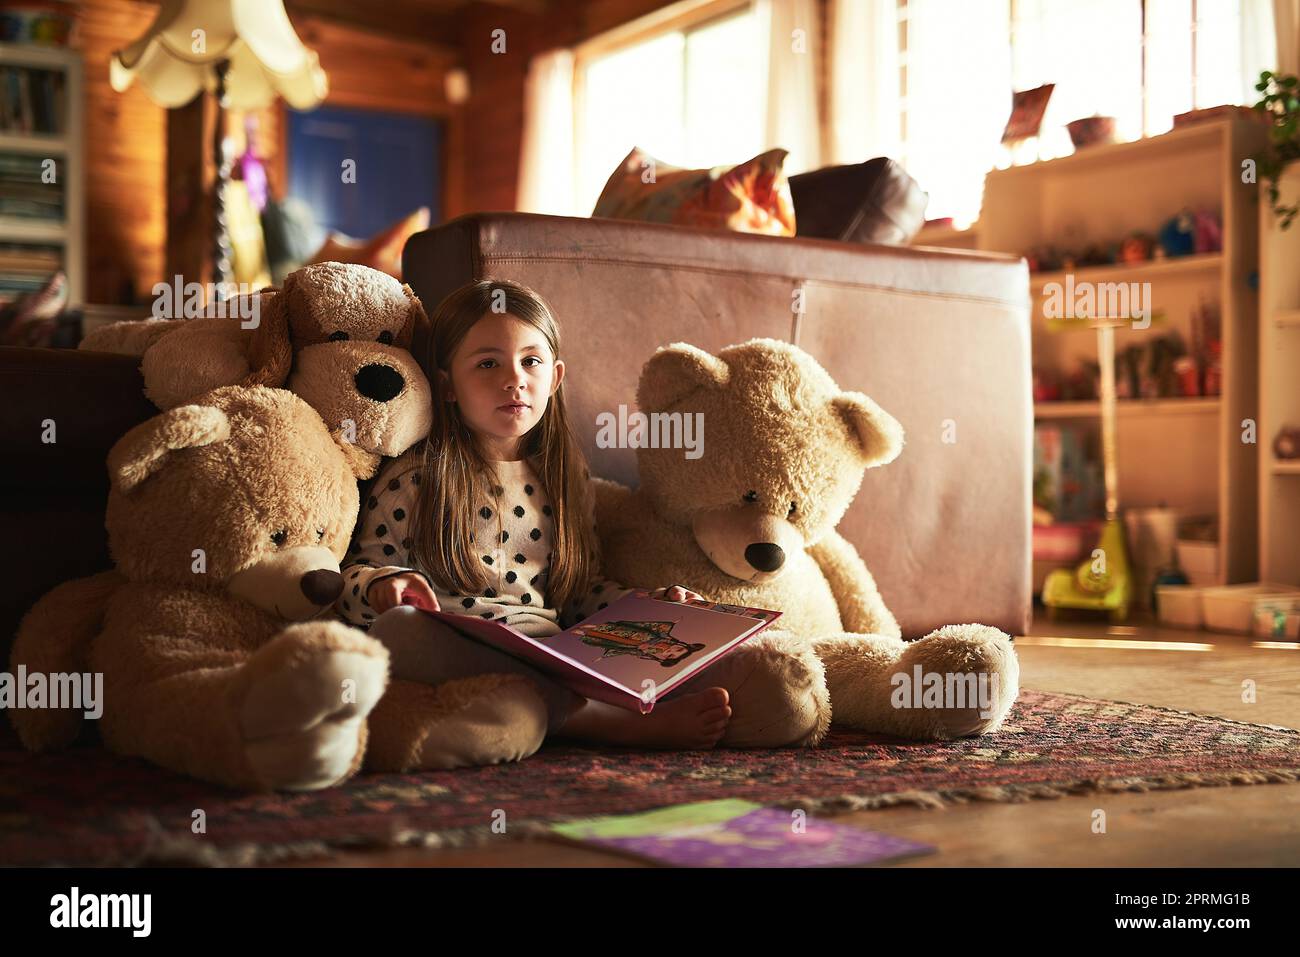 My teddy bears love storytime as much as I do. a little girl reading a book with her teddy bears around her. Stock Photo